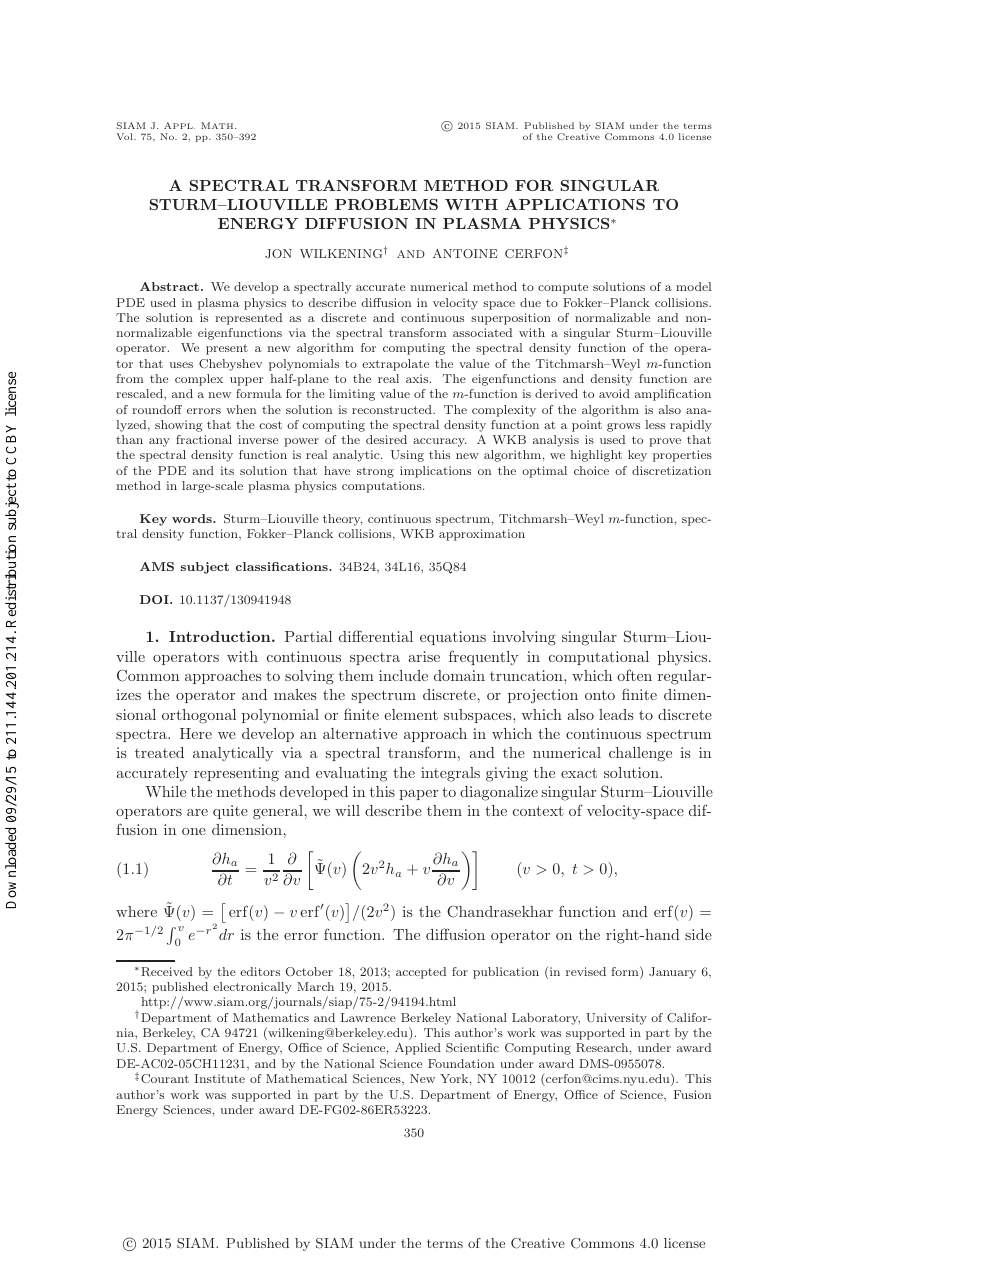 A Spectral Transform Method For Singular Sturm Liouville Problems With Applications To Energy Diffusion In Plasma Physics Topic Of Research Paper In Physical Sciences Download Scholarly Article Pdf And Read For Free